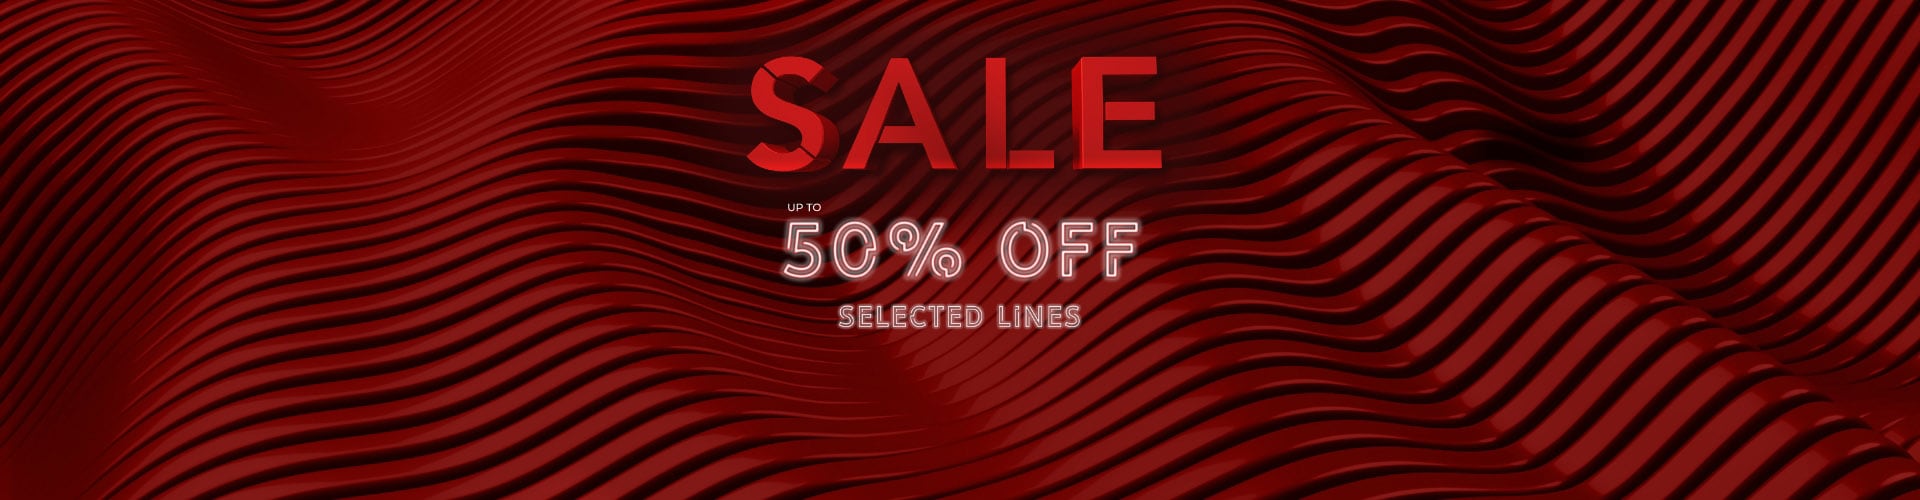 sale up to 50% off 